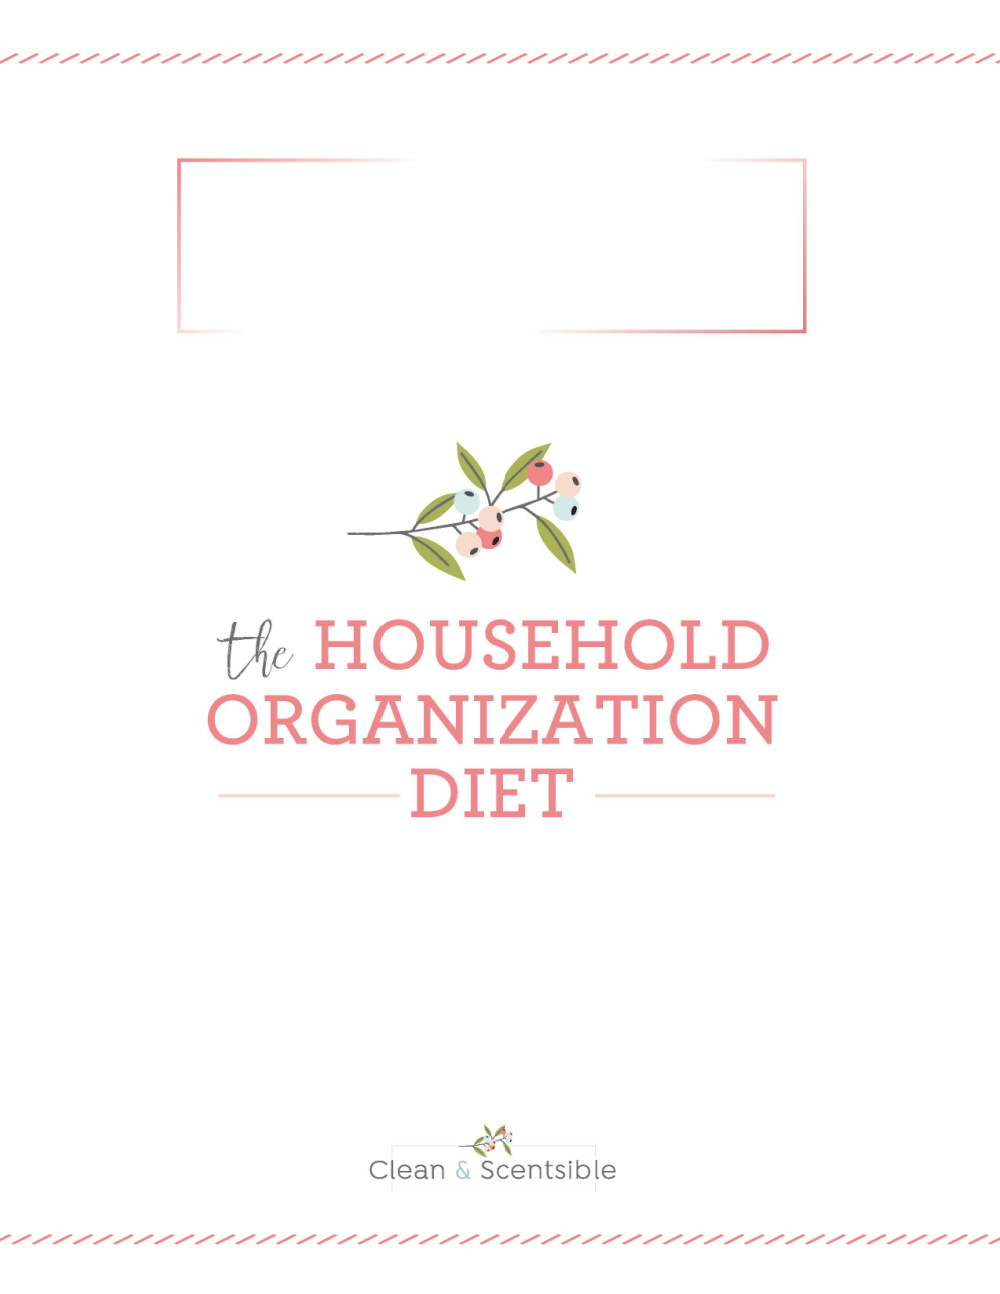 The Household Organization Diet title page free printable.